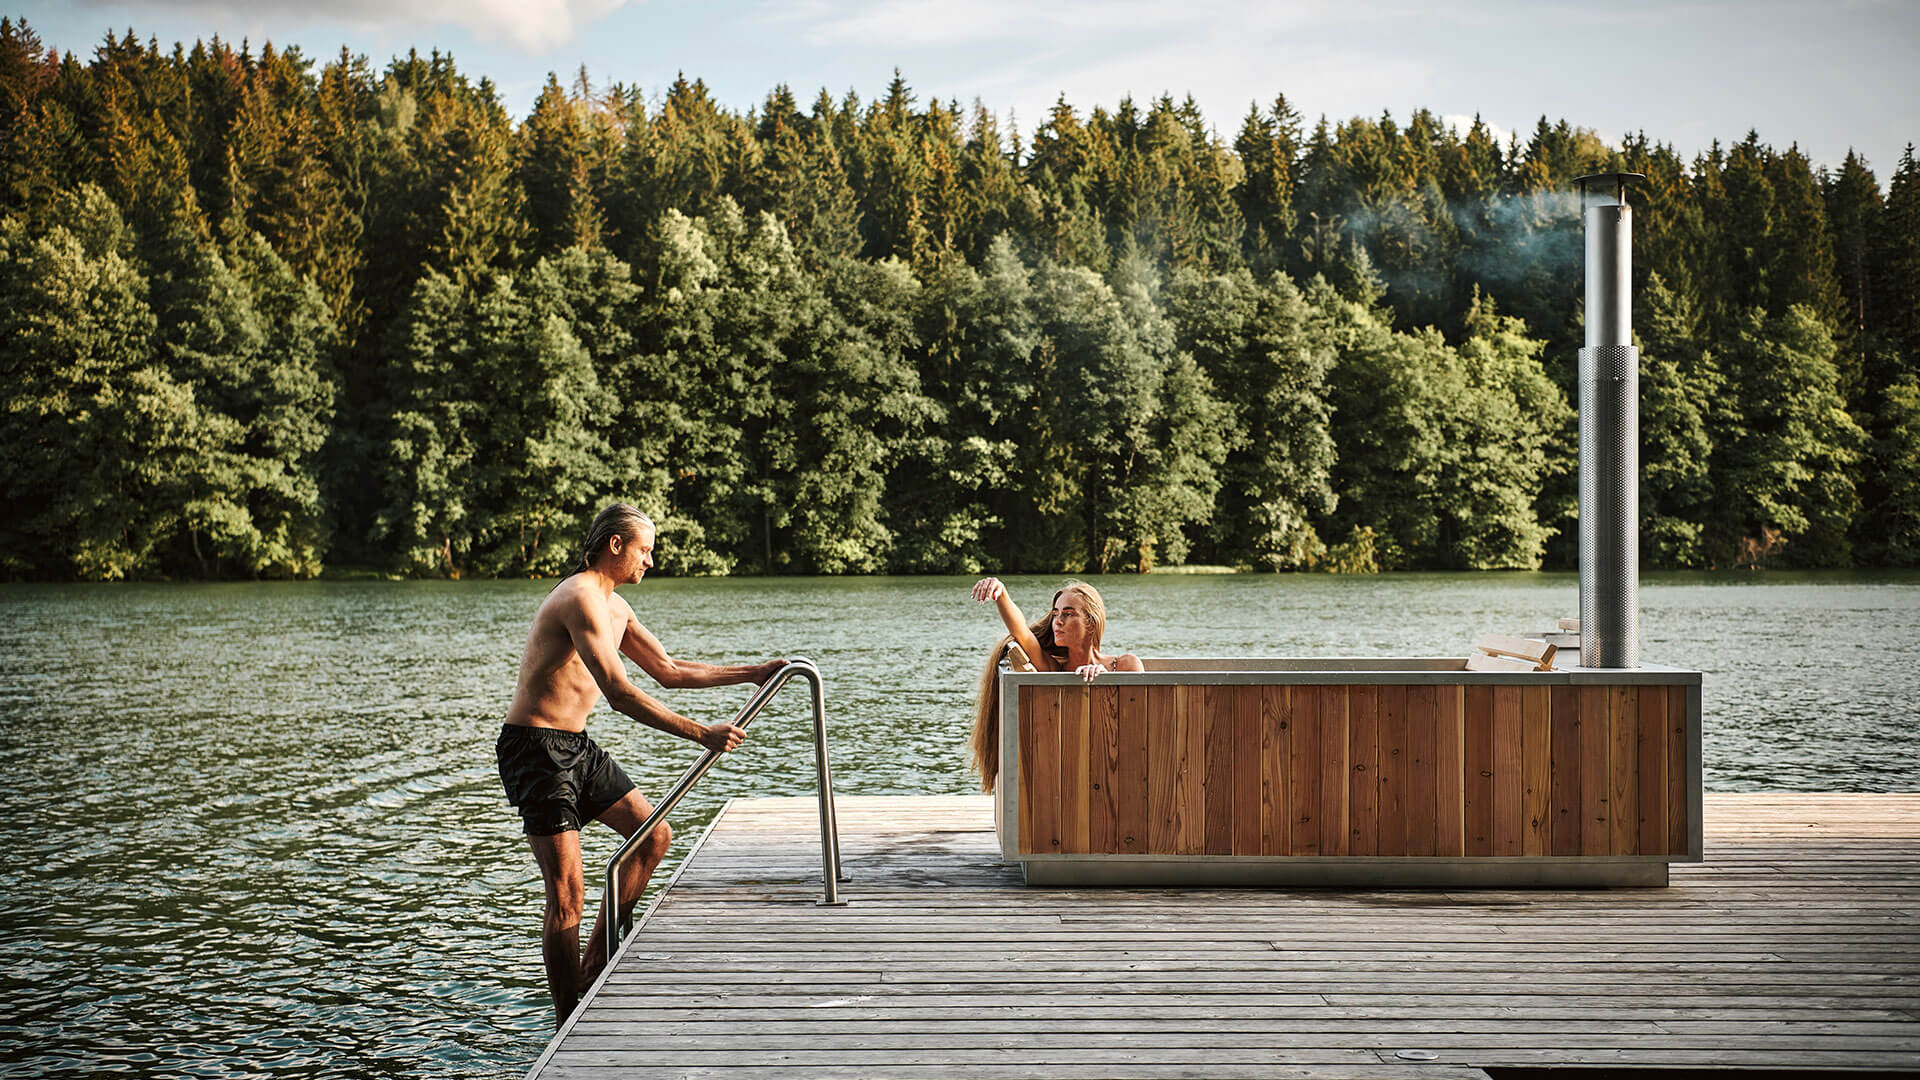 Timber Date Hot Tubs